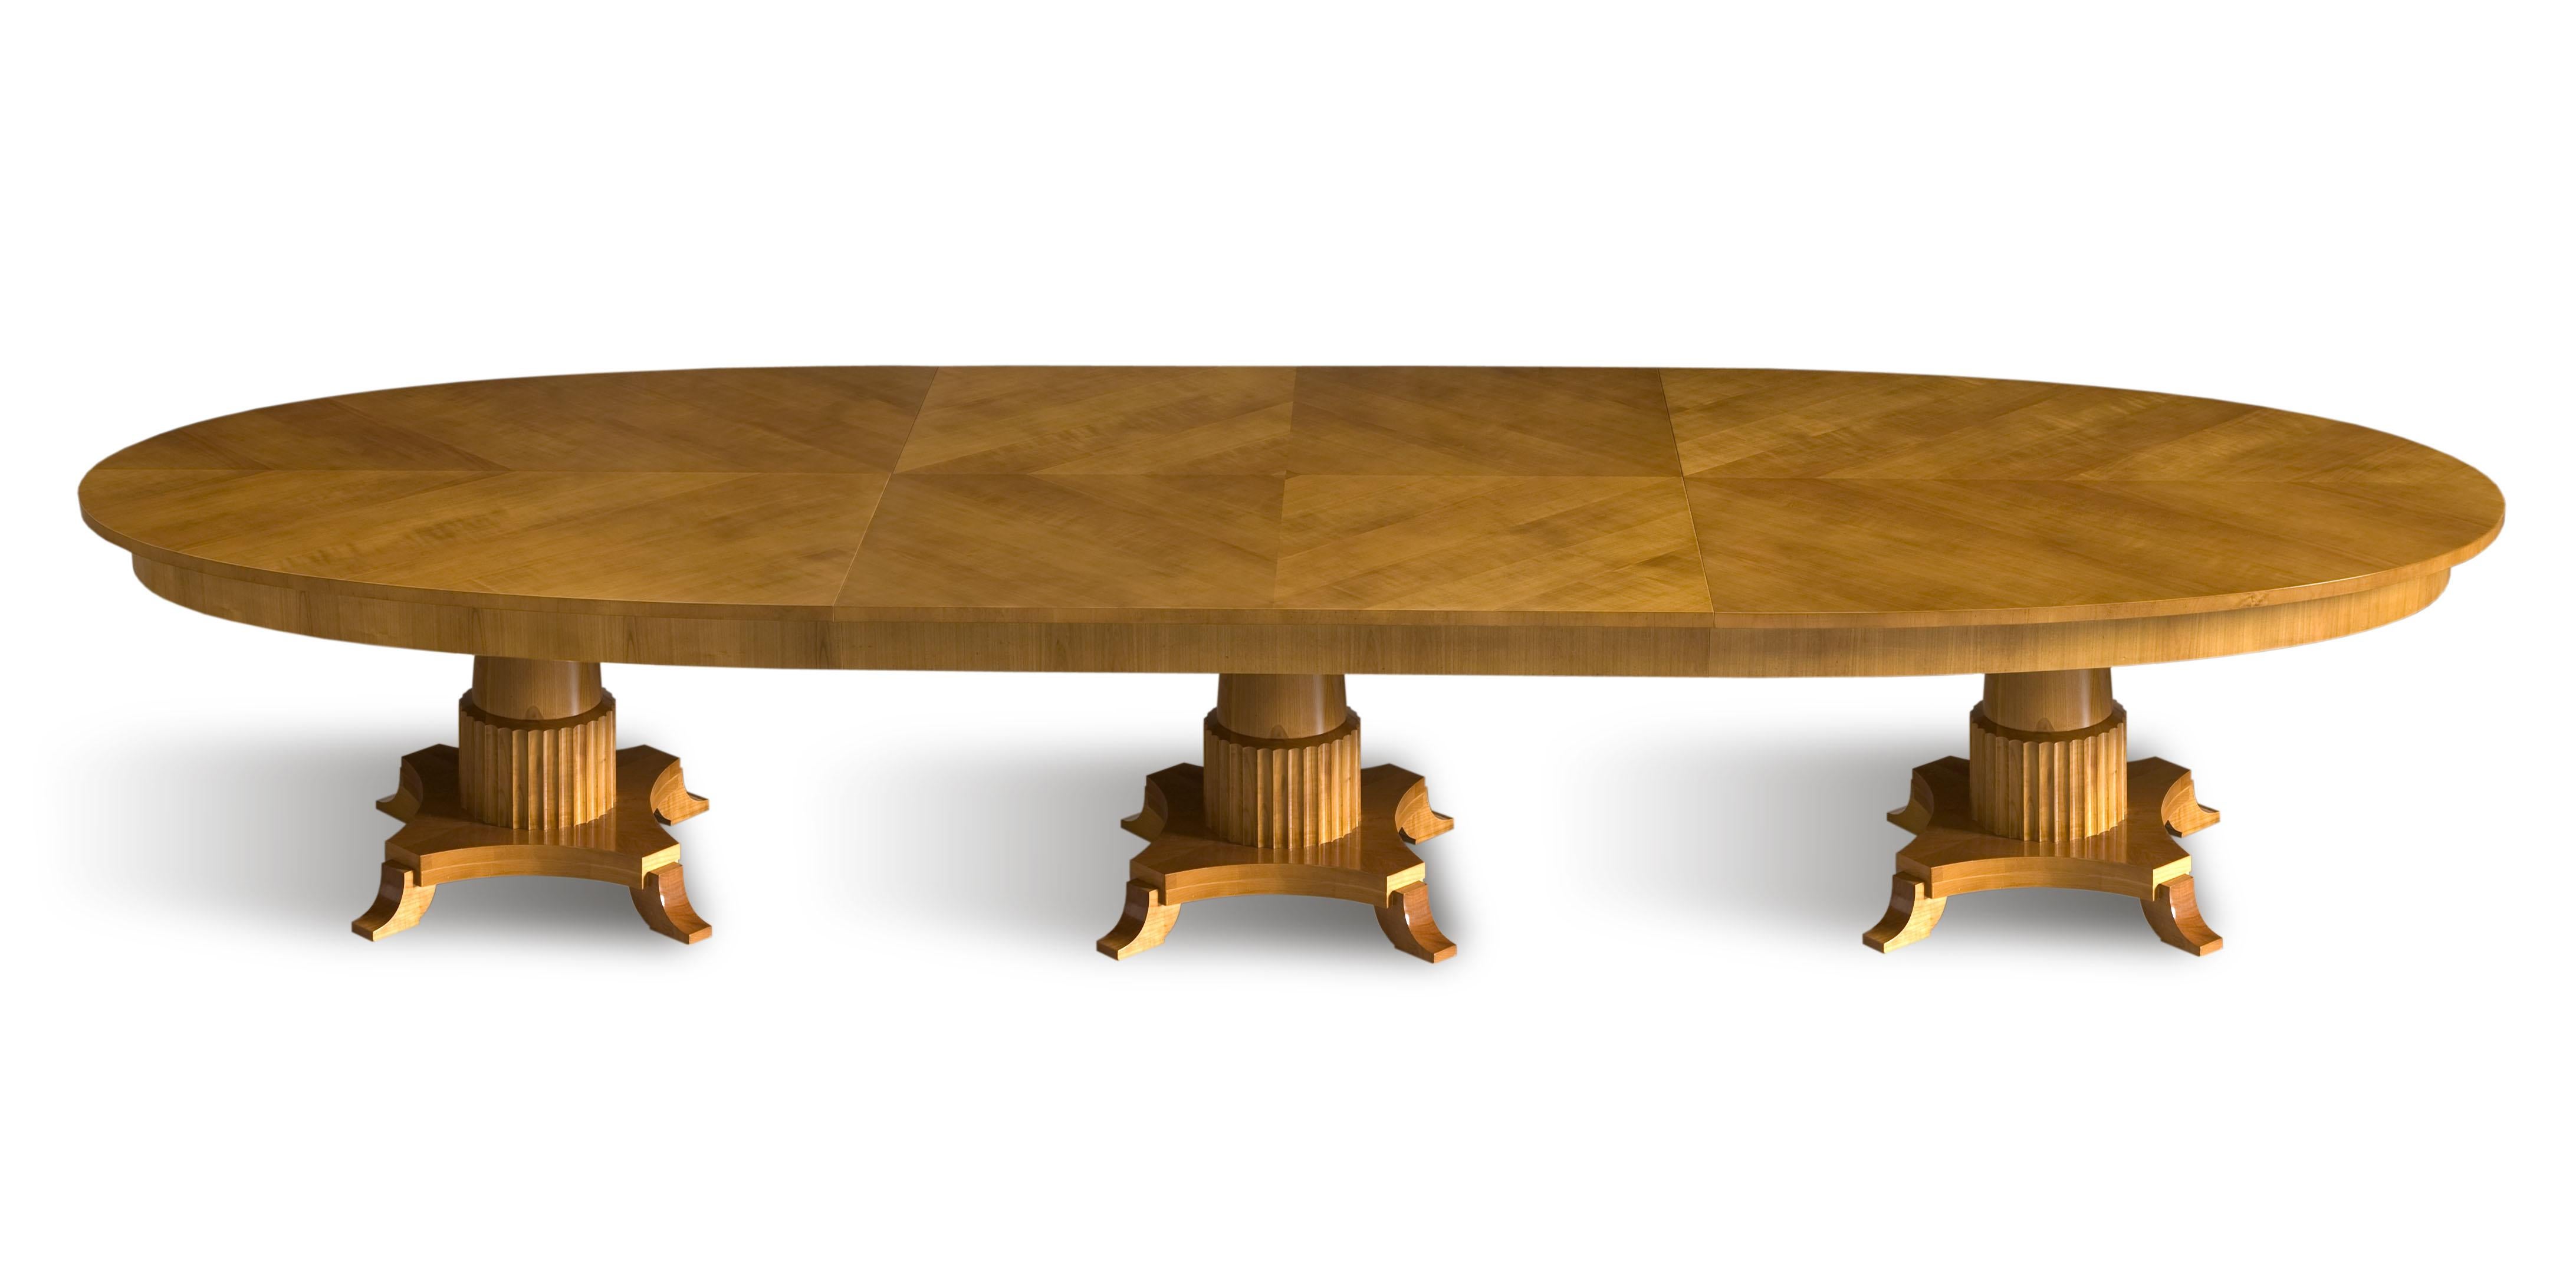 Biedermeier style oval table made of cherrywood
Made to order in different finishes and different dimension.